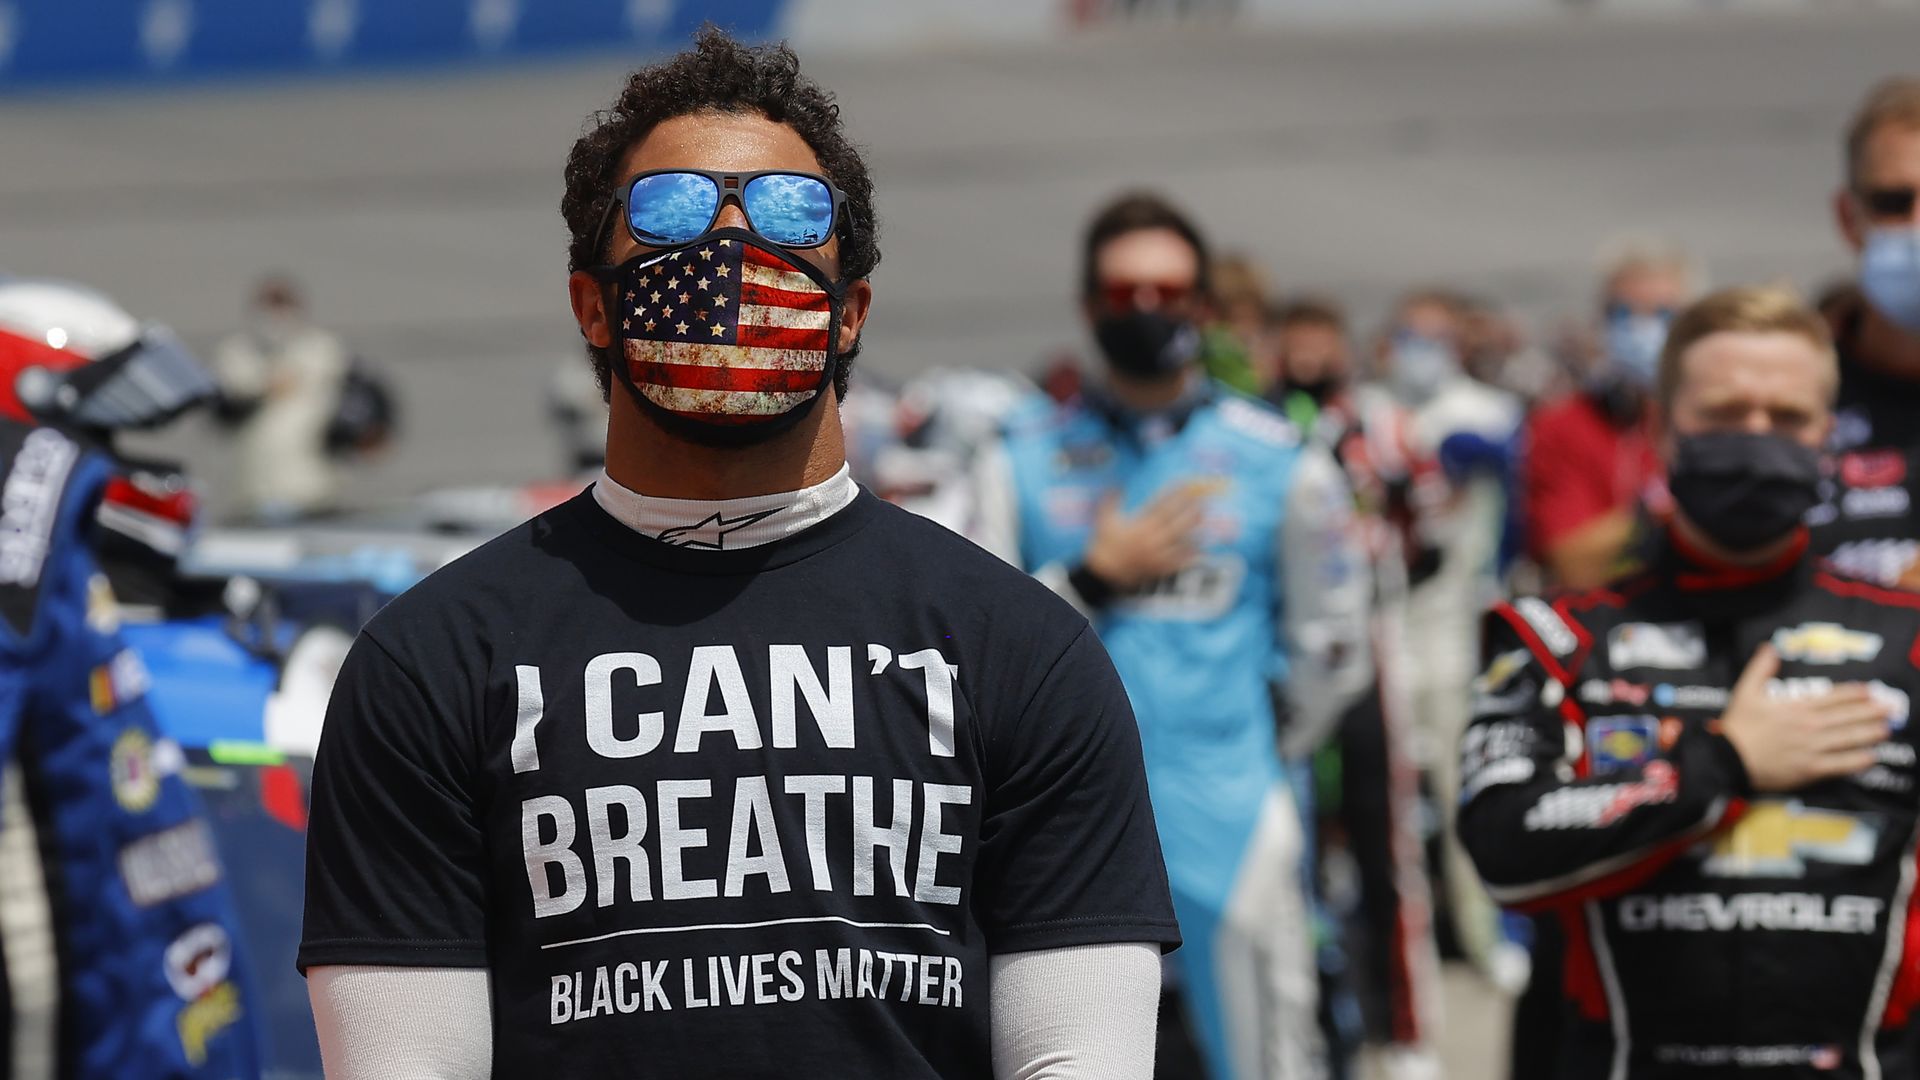 Bubba Wallace, driver of the #43 McDonald's Chevrolet, wears a "I Can't Breathe - Black Lives Matter" T-shirt